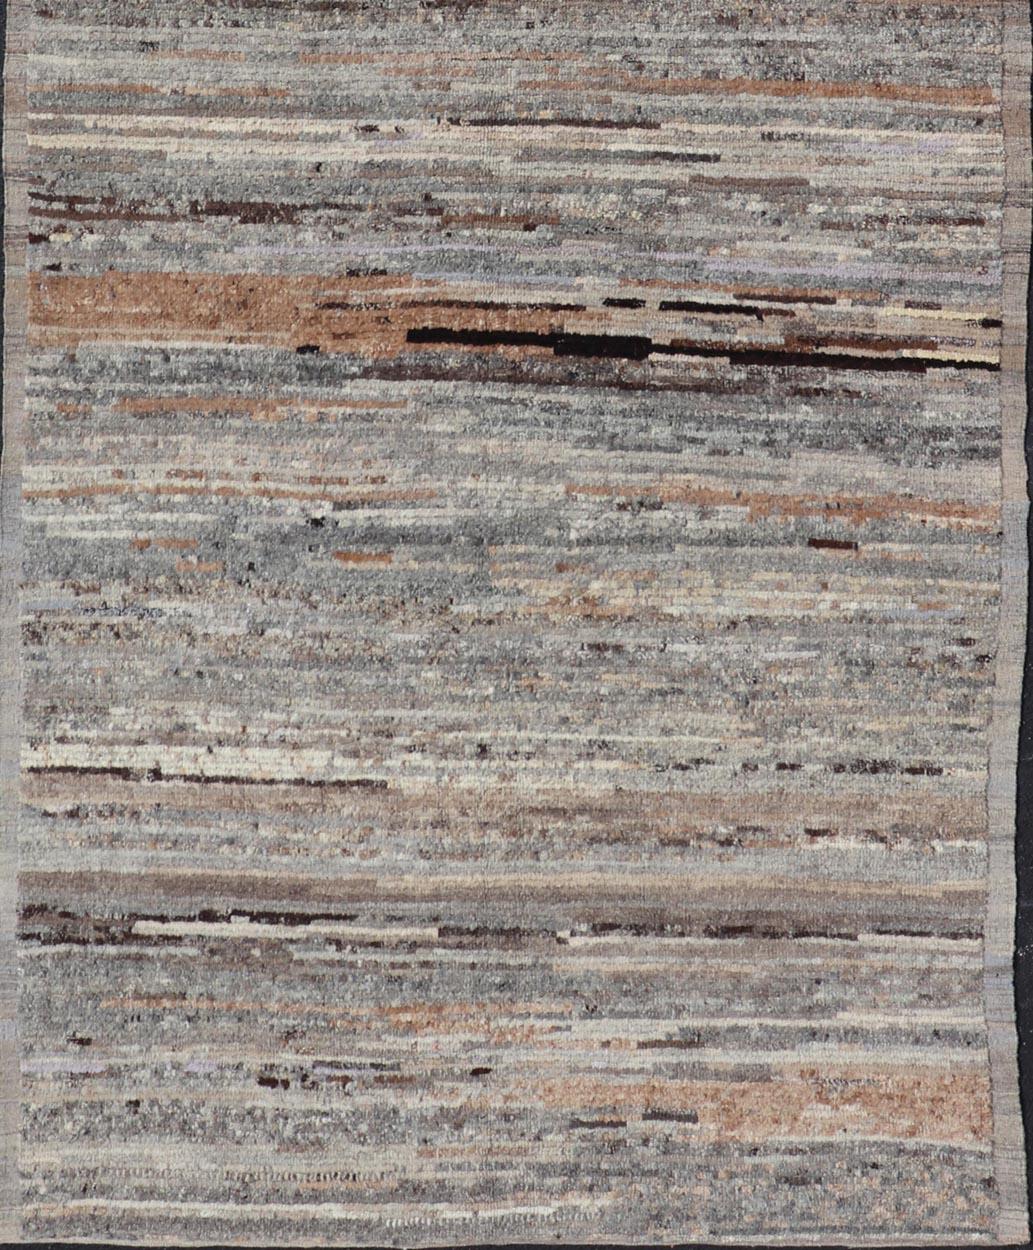 Modern Gallery Hand-Knotted Rug in Natural Shades Wool of Gray, Brown, & Ivory 4